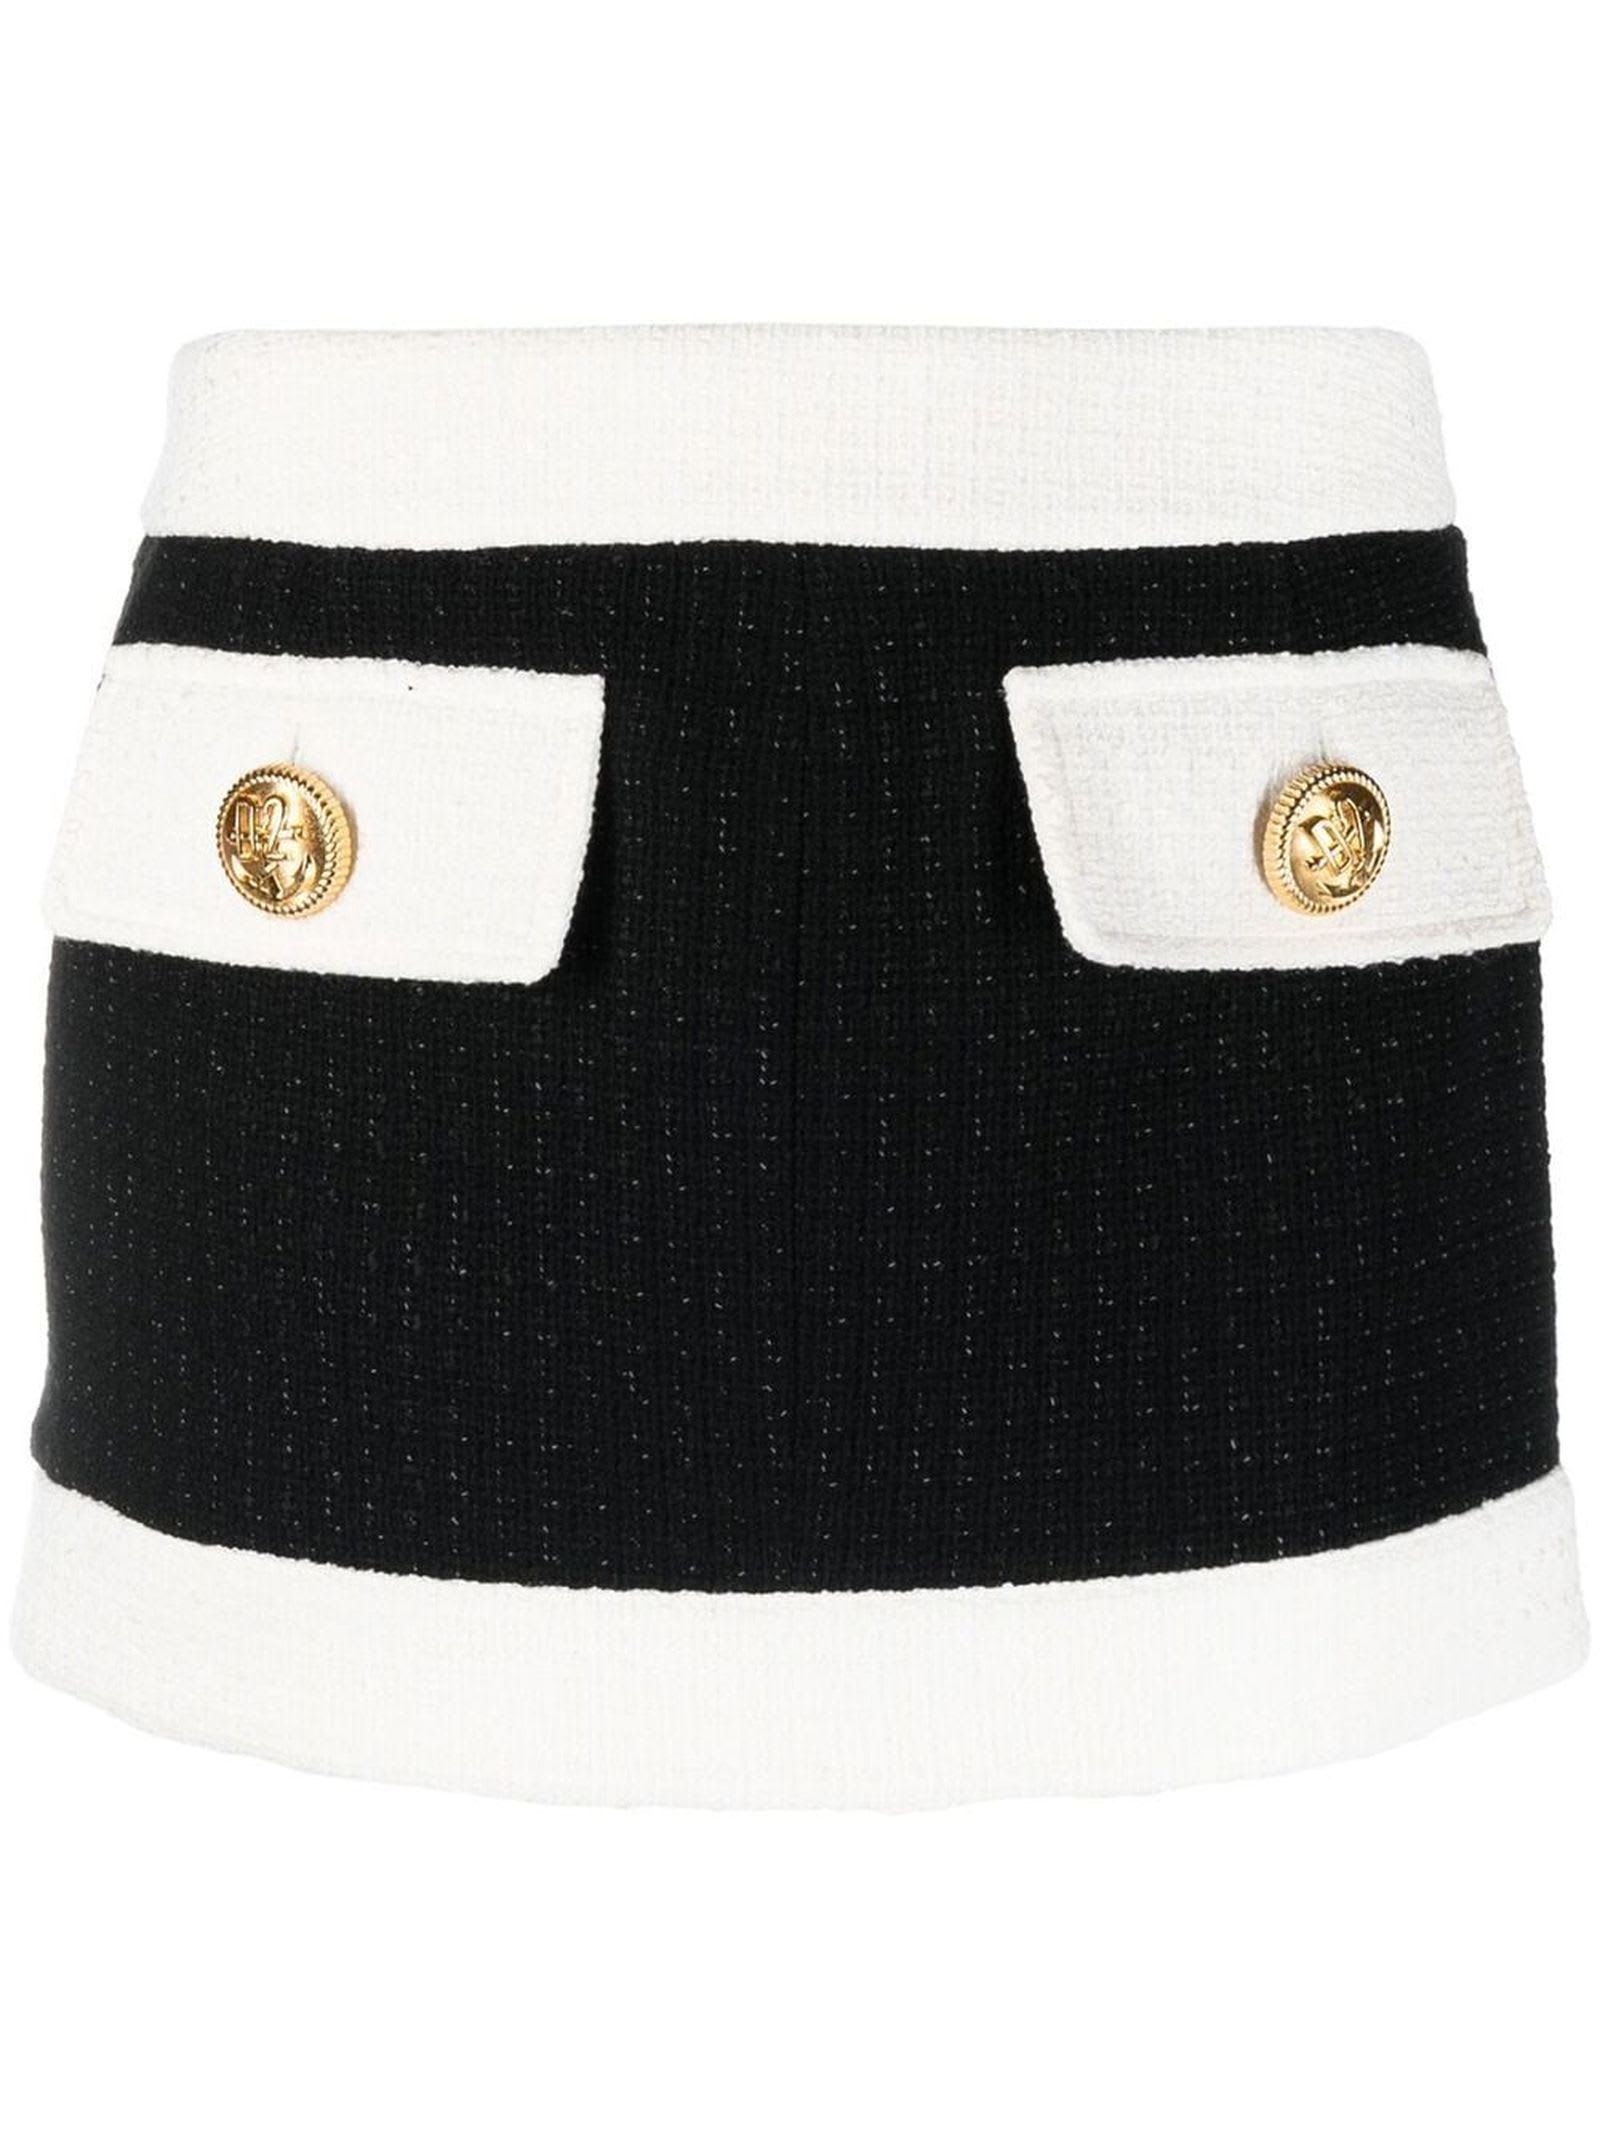 Dsquared2 Black And White Cotton Blend Tweed Mini Skirt